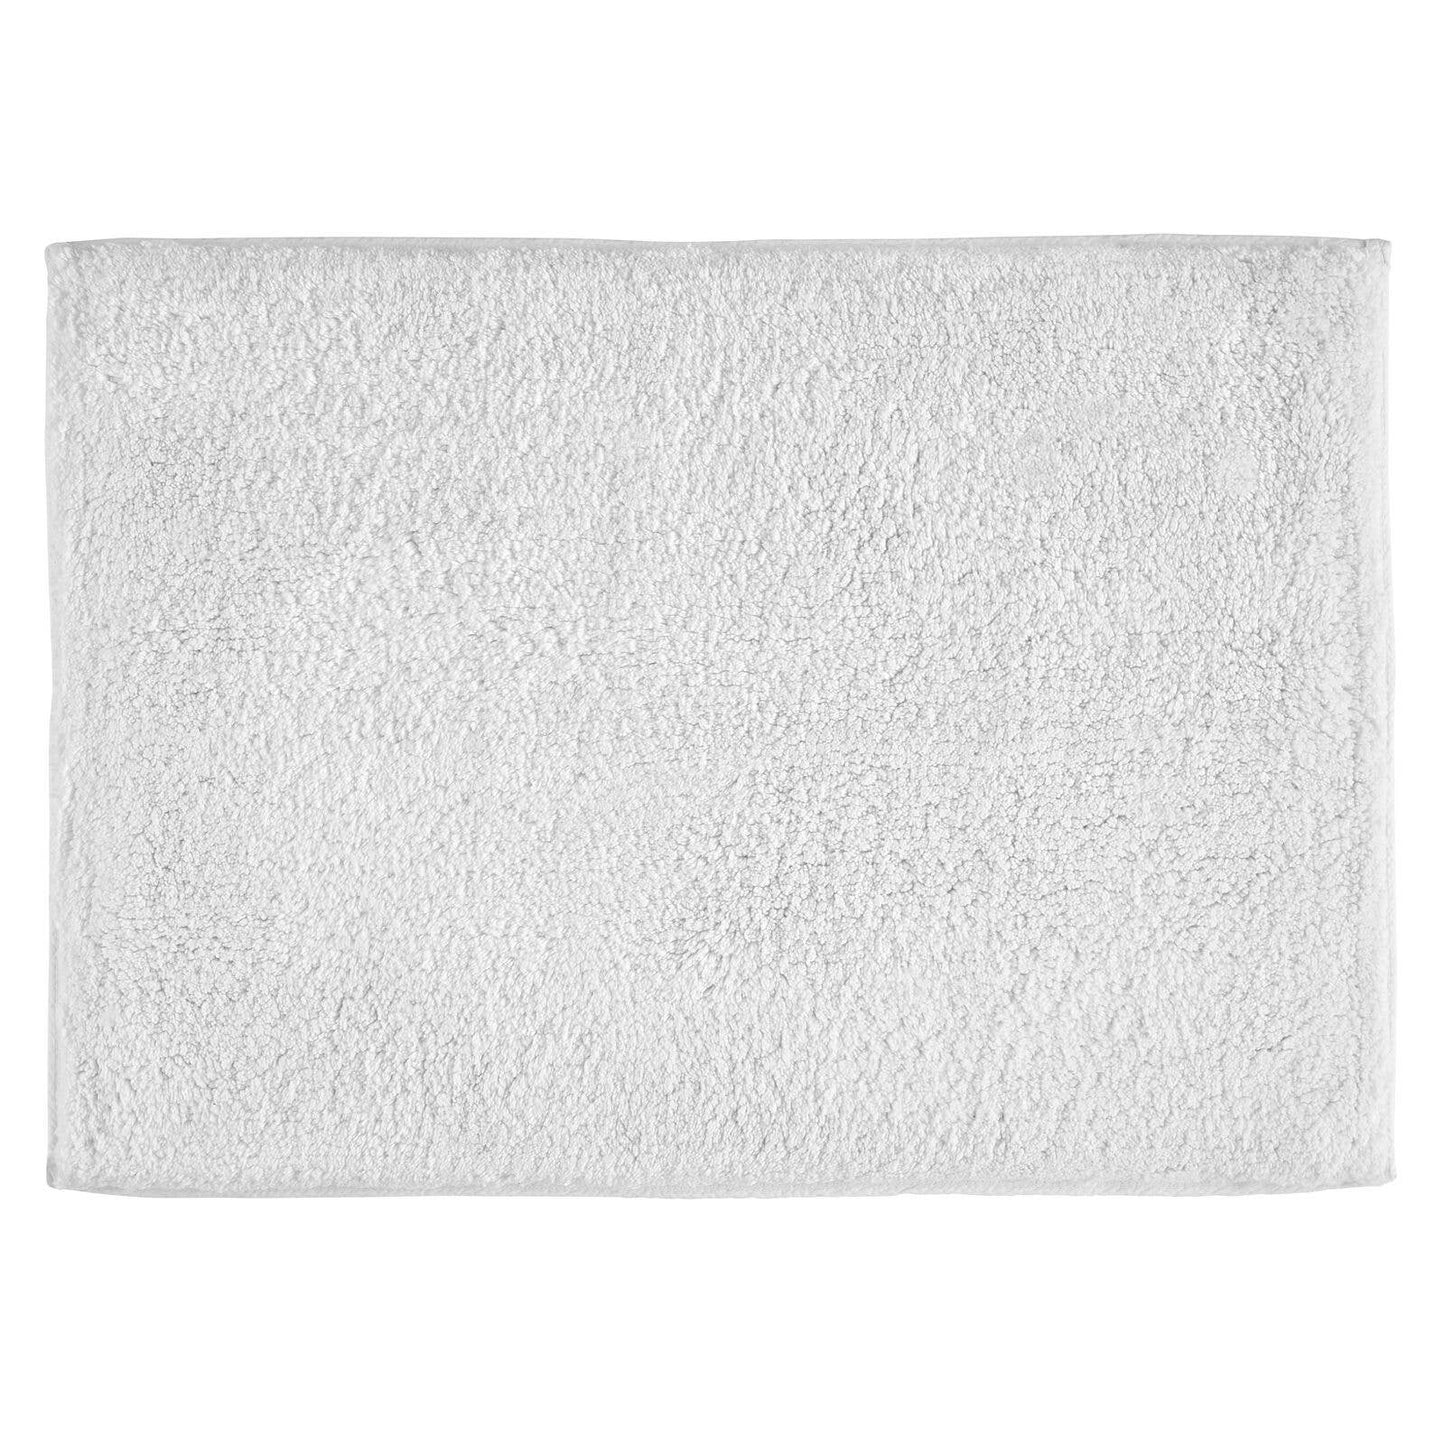 Nate Home by Nate Berkus Cotton Bath Rug 17x24 Wht - Curated Home Decor